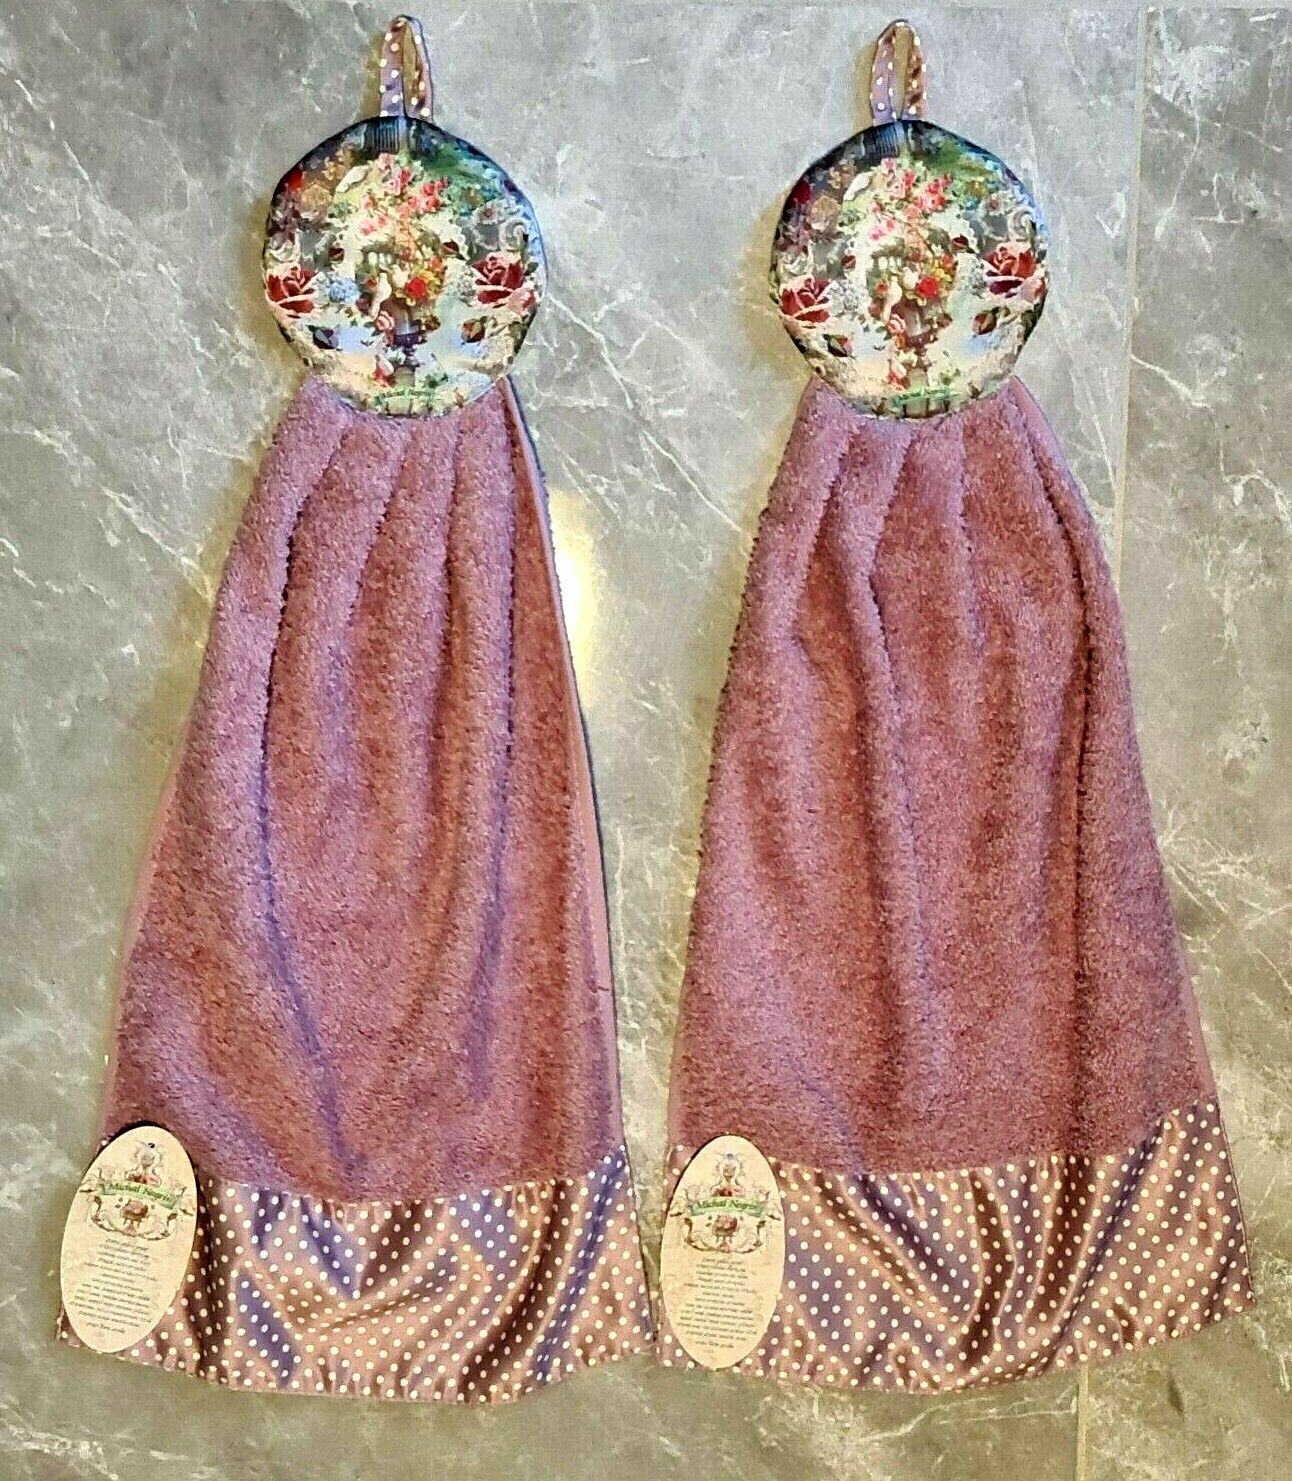 Two Decorative Kitchen Towels By Michal Negrin Light Purple Color With Flowers.